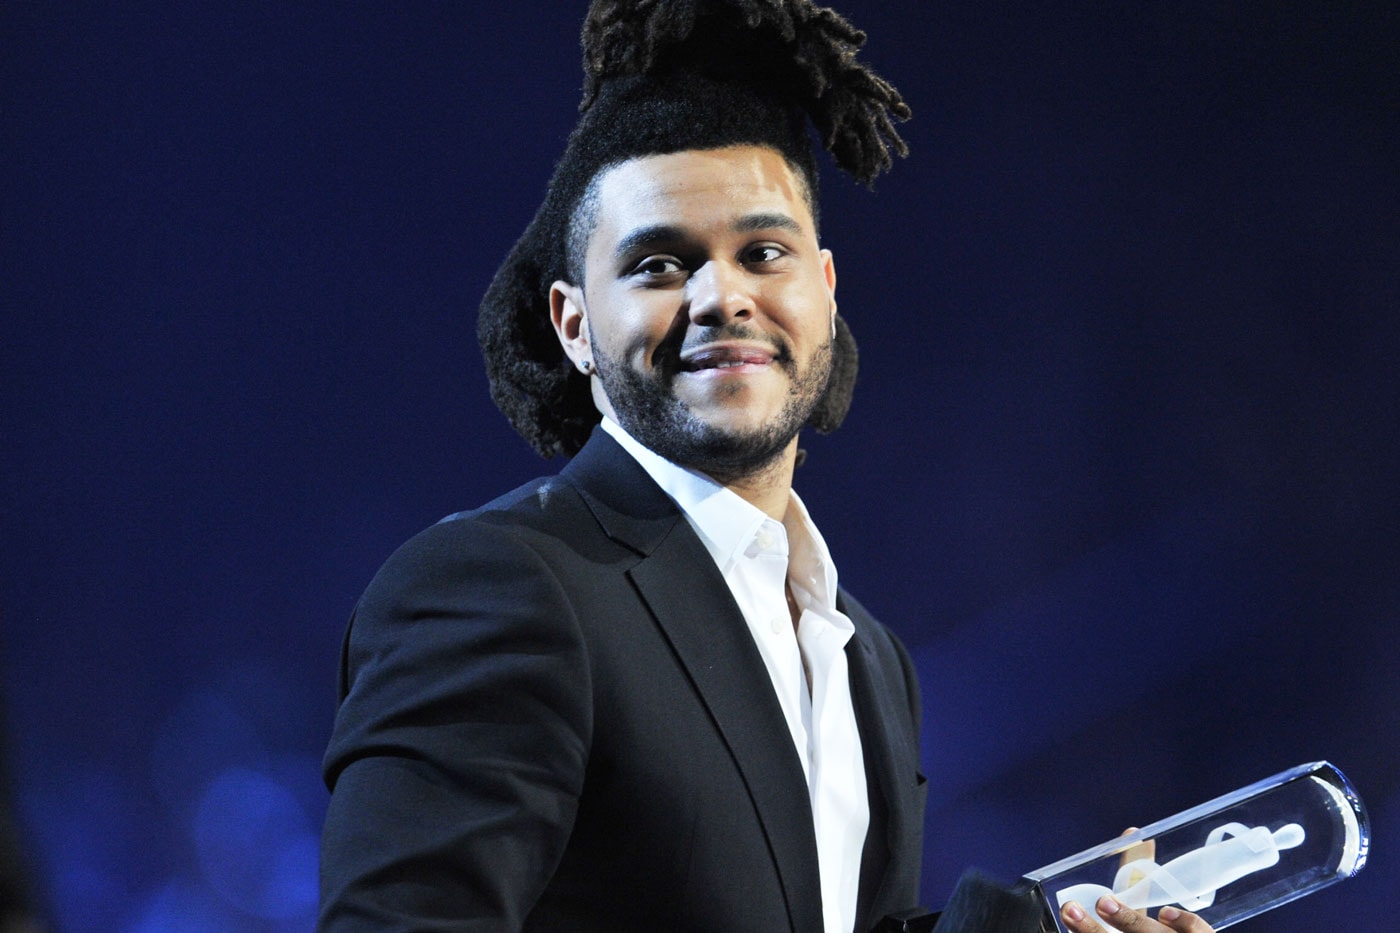 The Weeknd, A$AP Rocky, Pharrell and More to Perform at 2015 MTV VMA